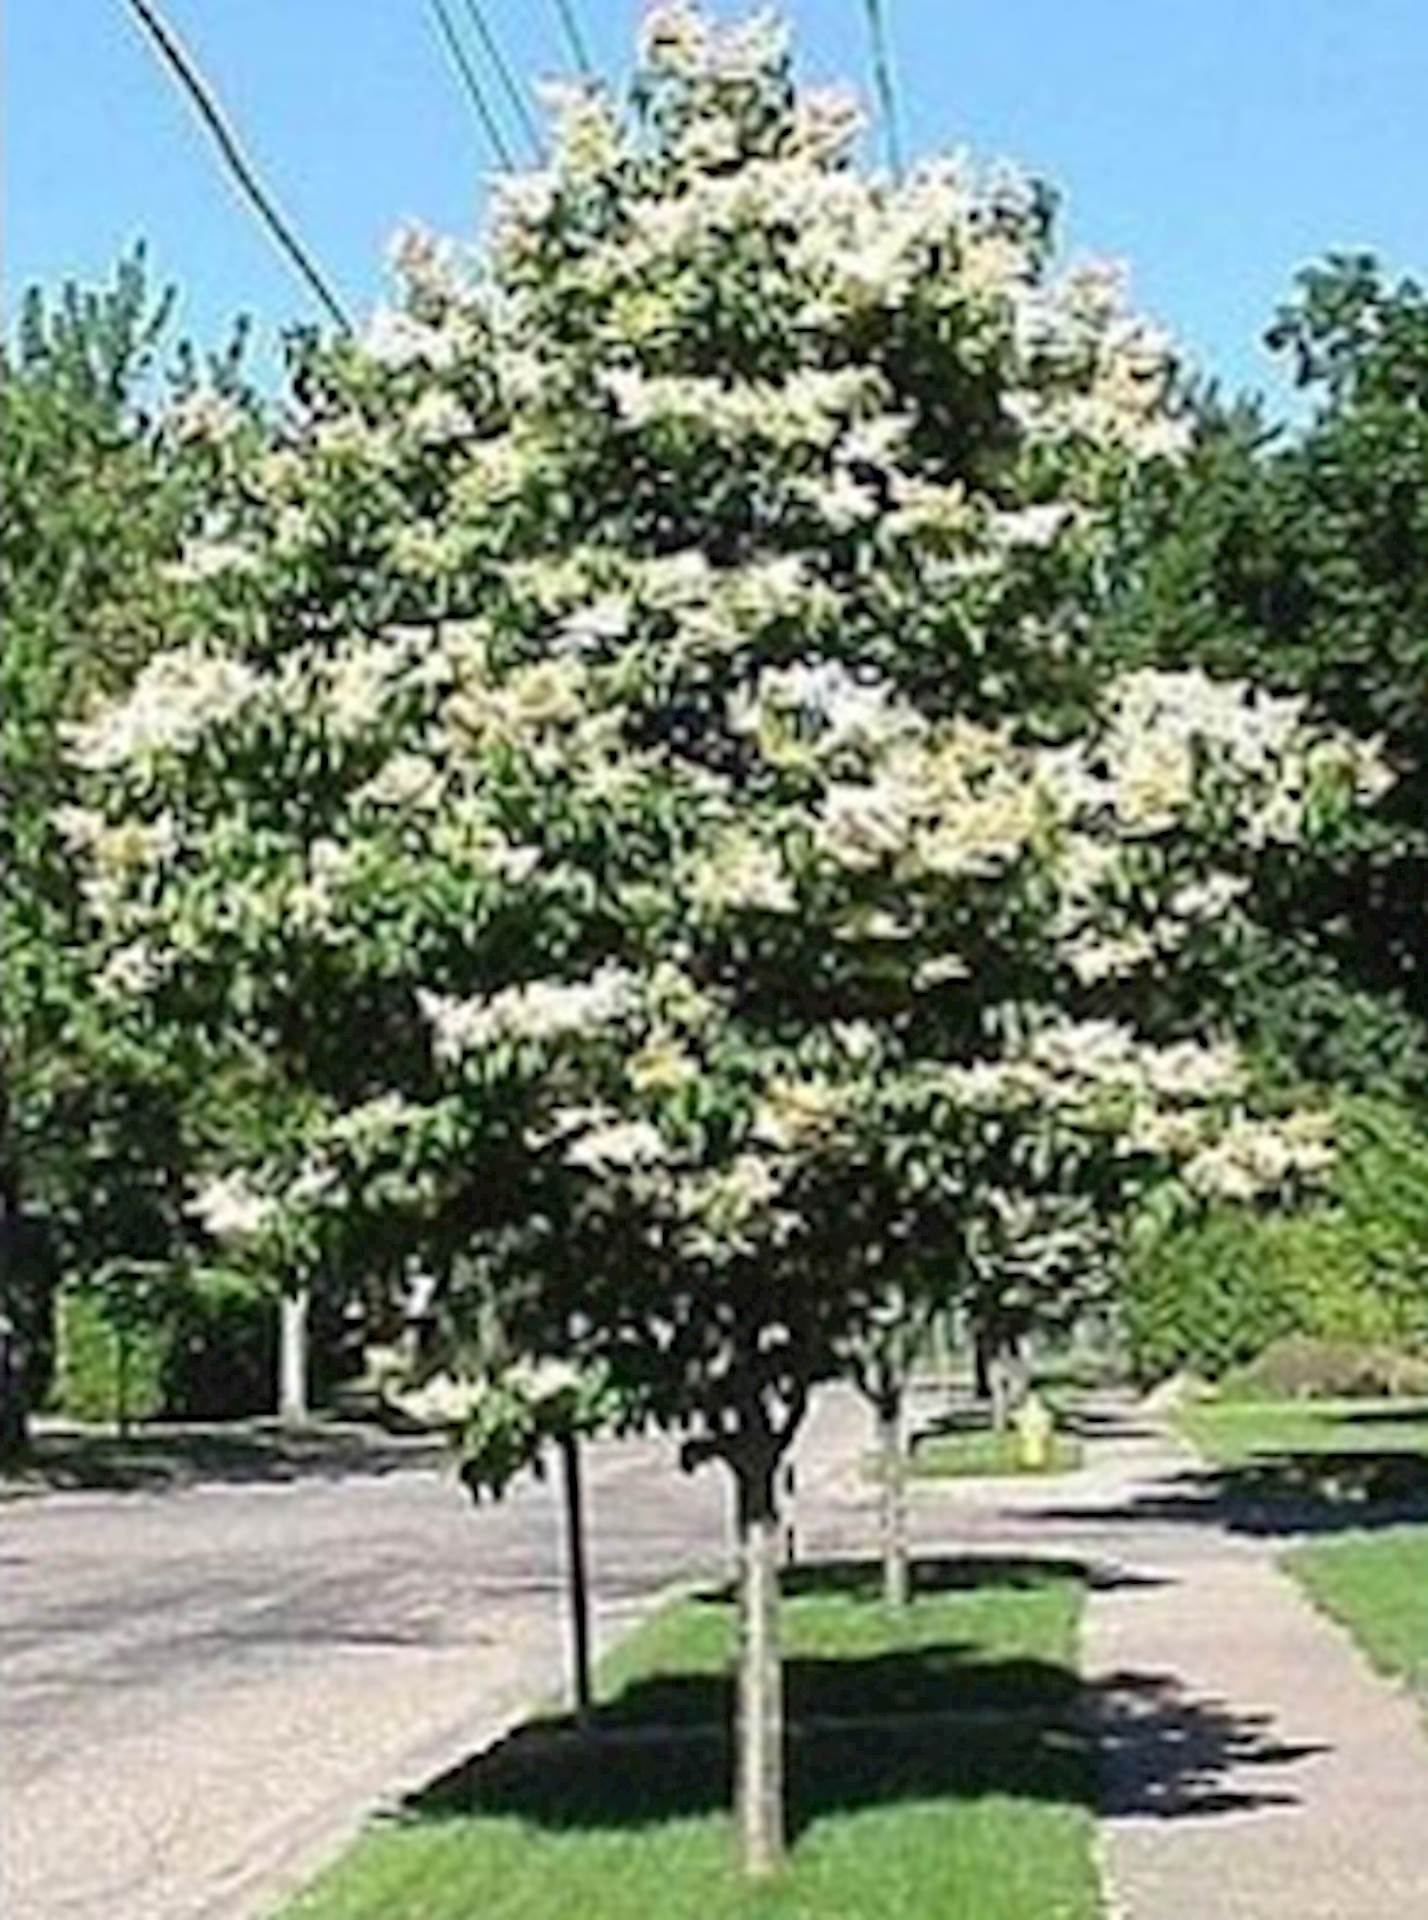 An ivory silk lilac tree blooming in the spring.